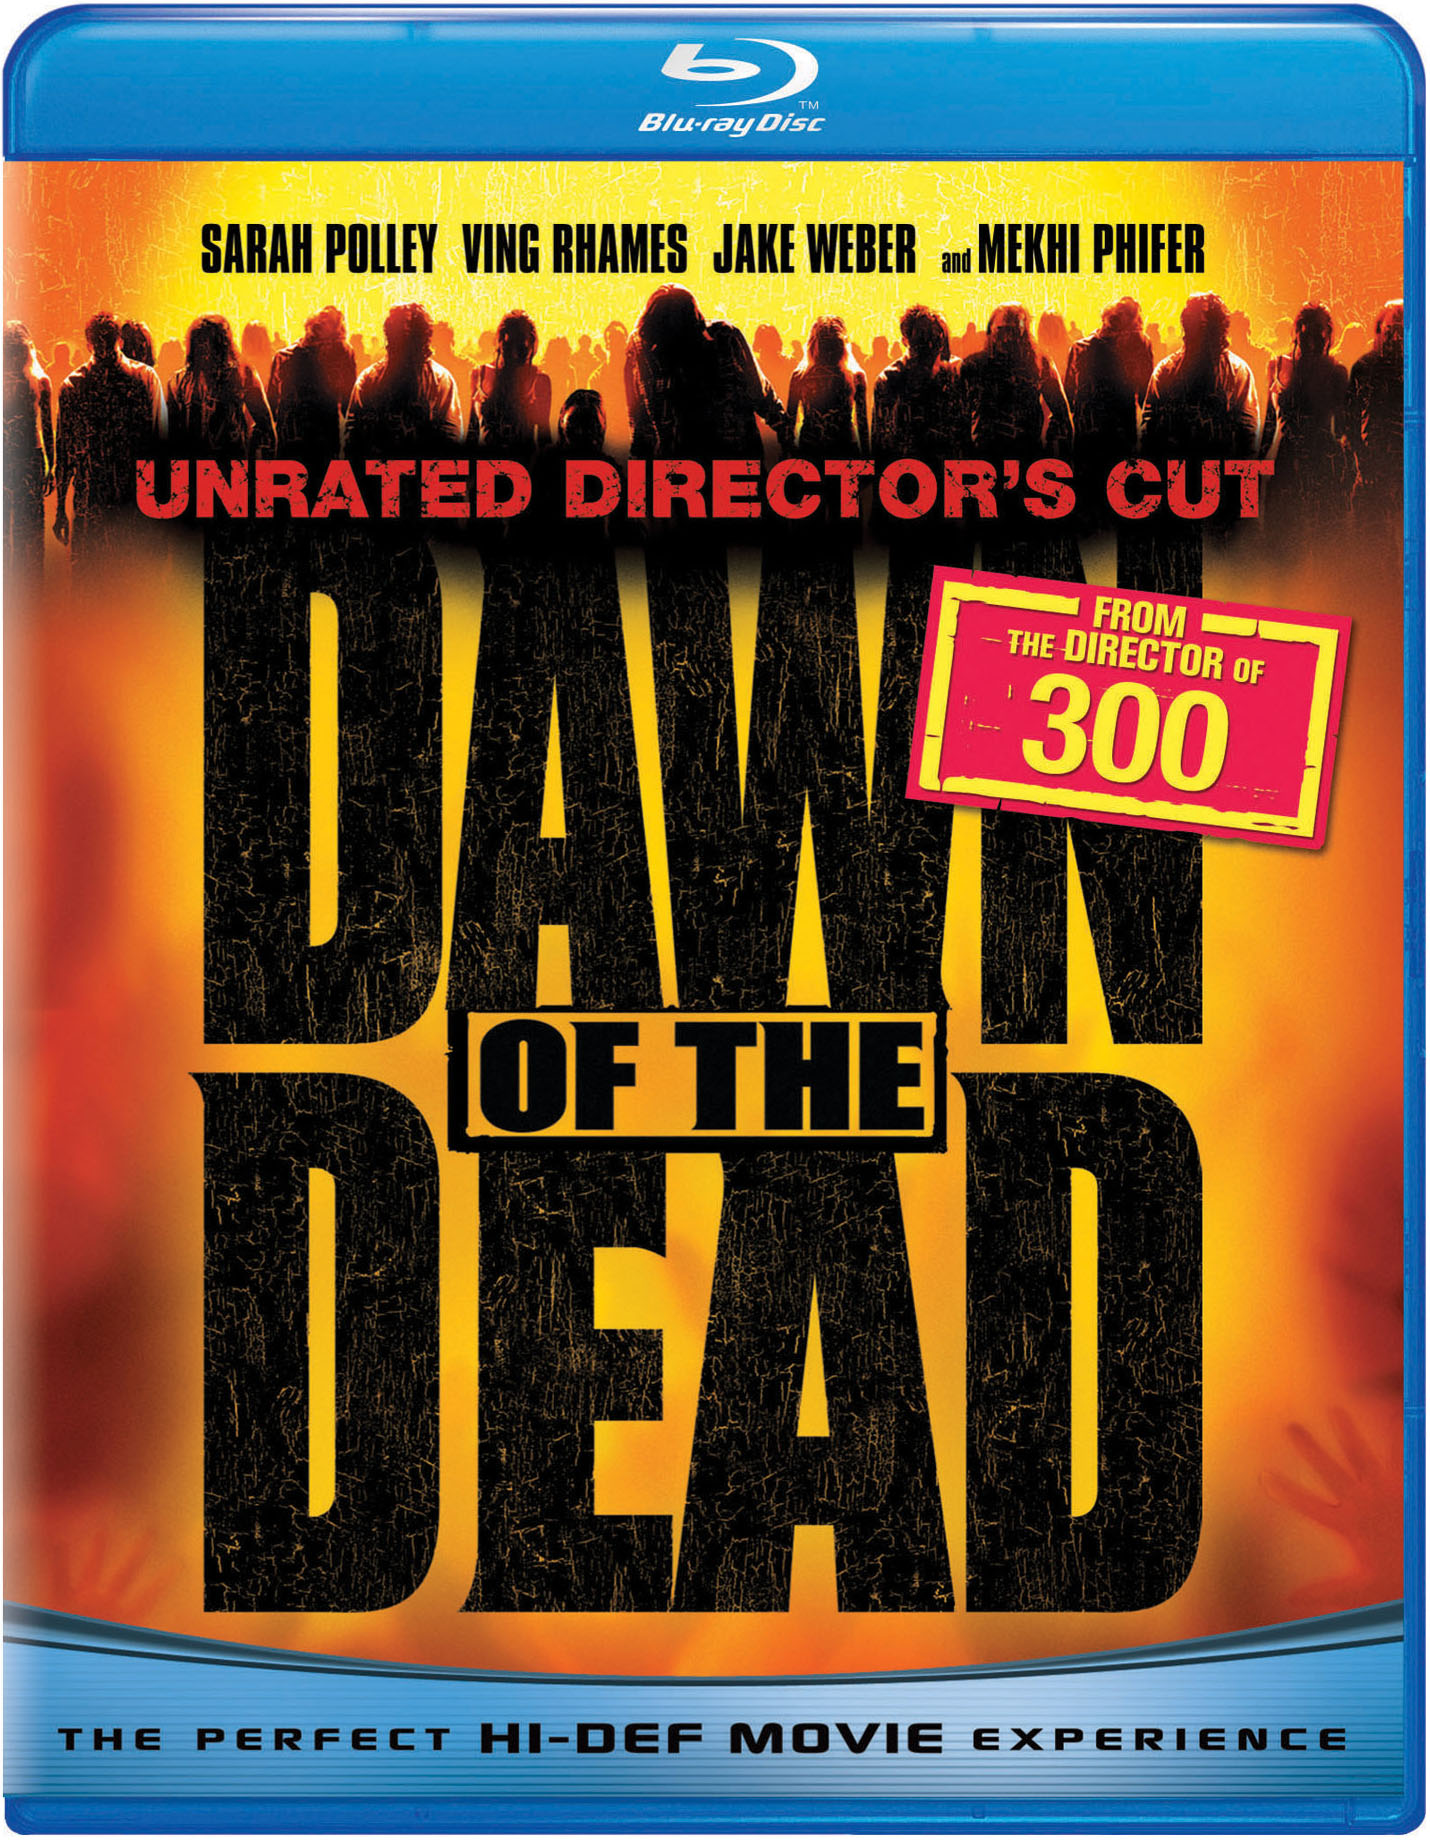 Dawn Of The Dead (Blu-ray + DVD) (Widescreen) - image 1 of 4